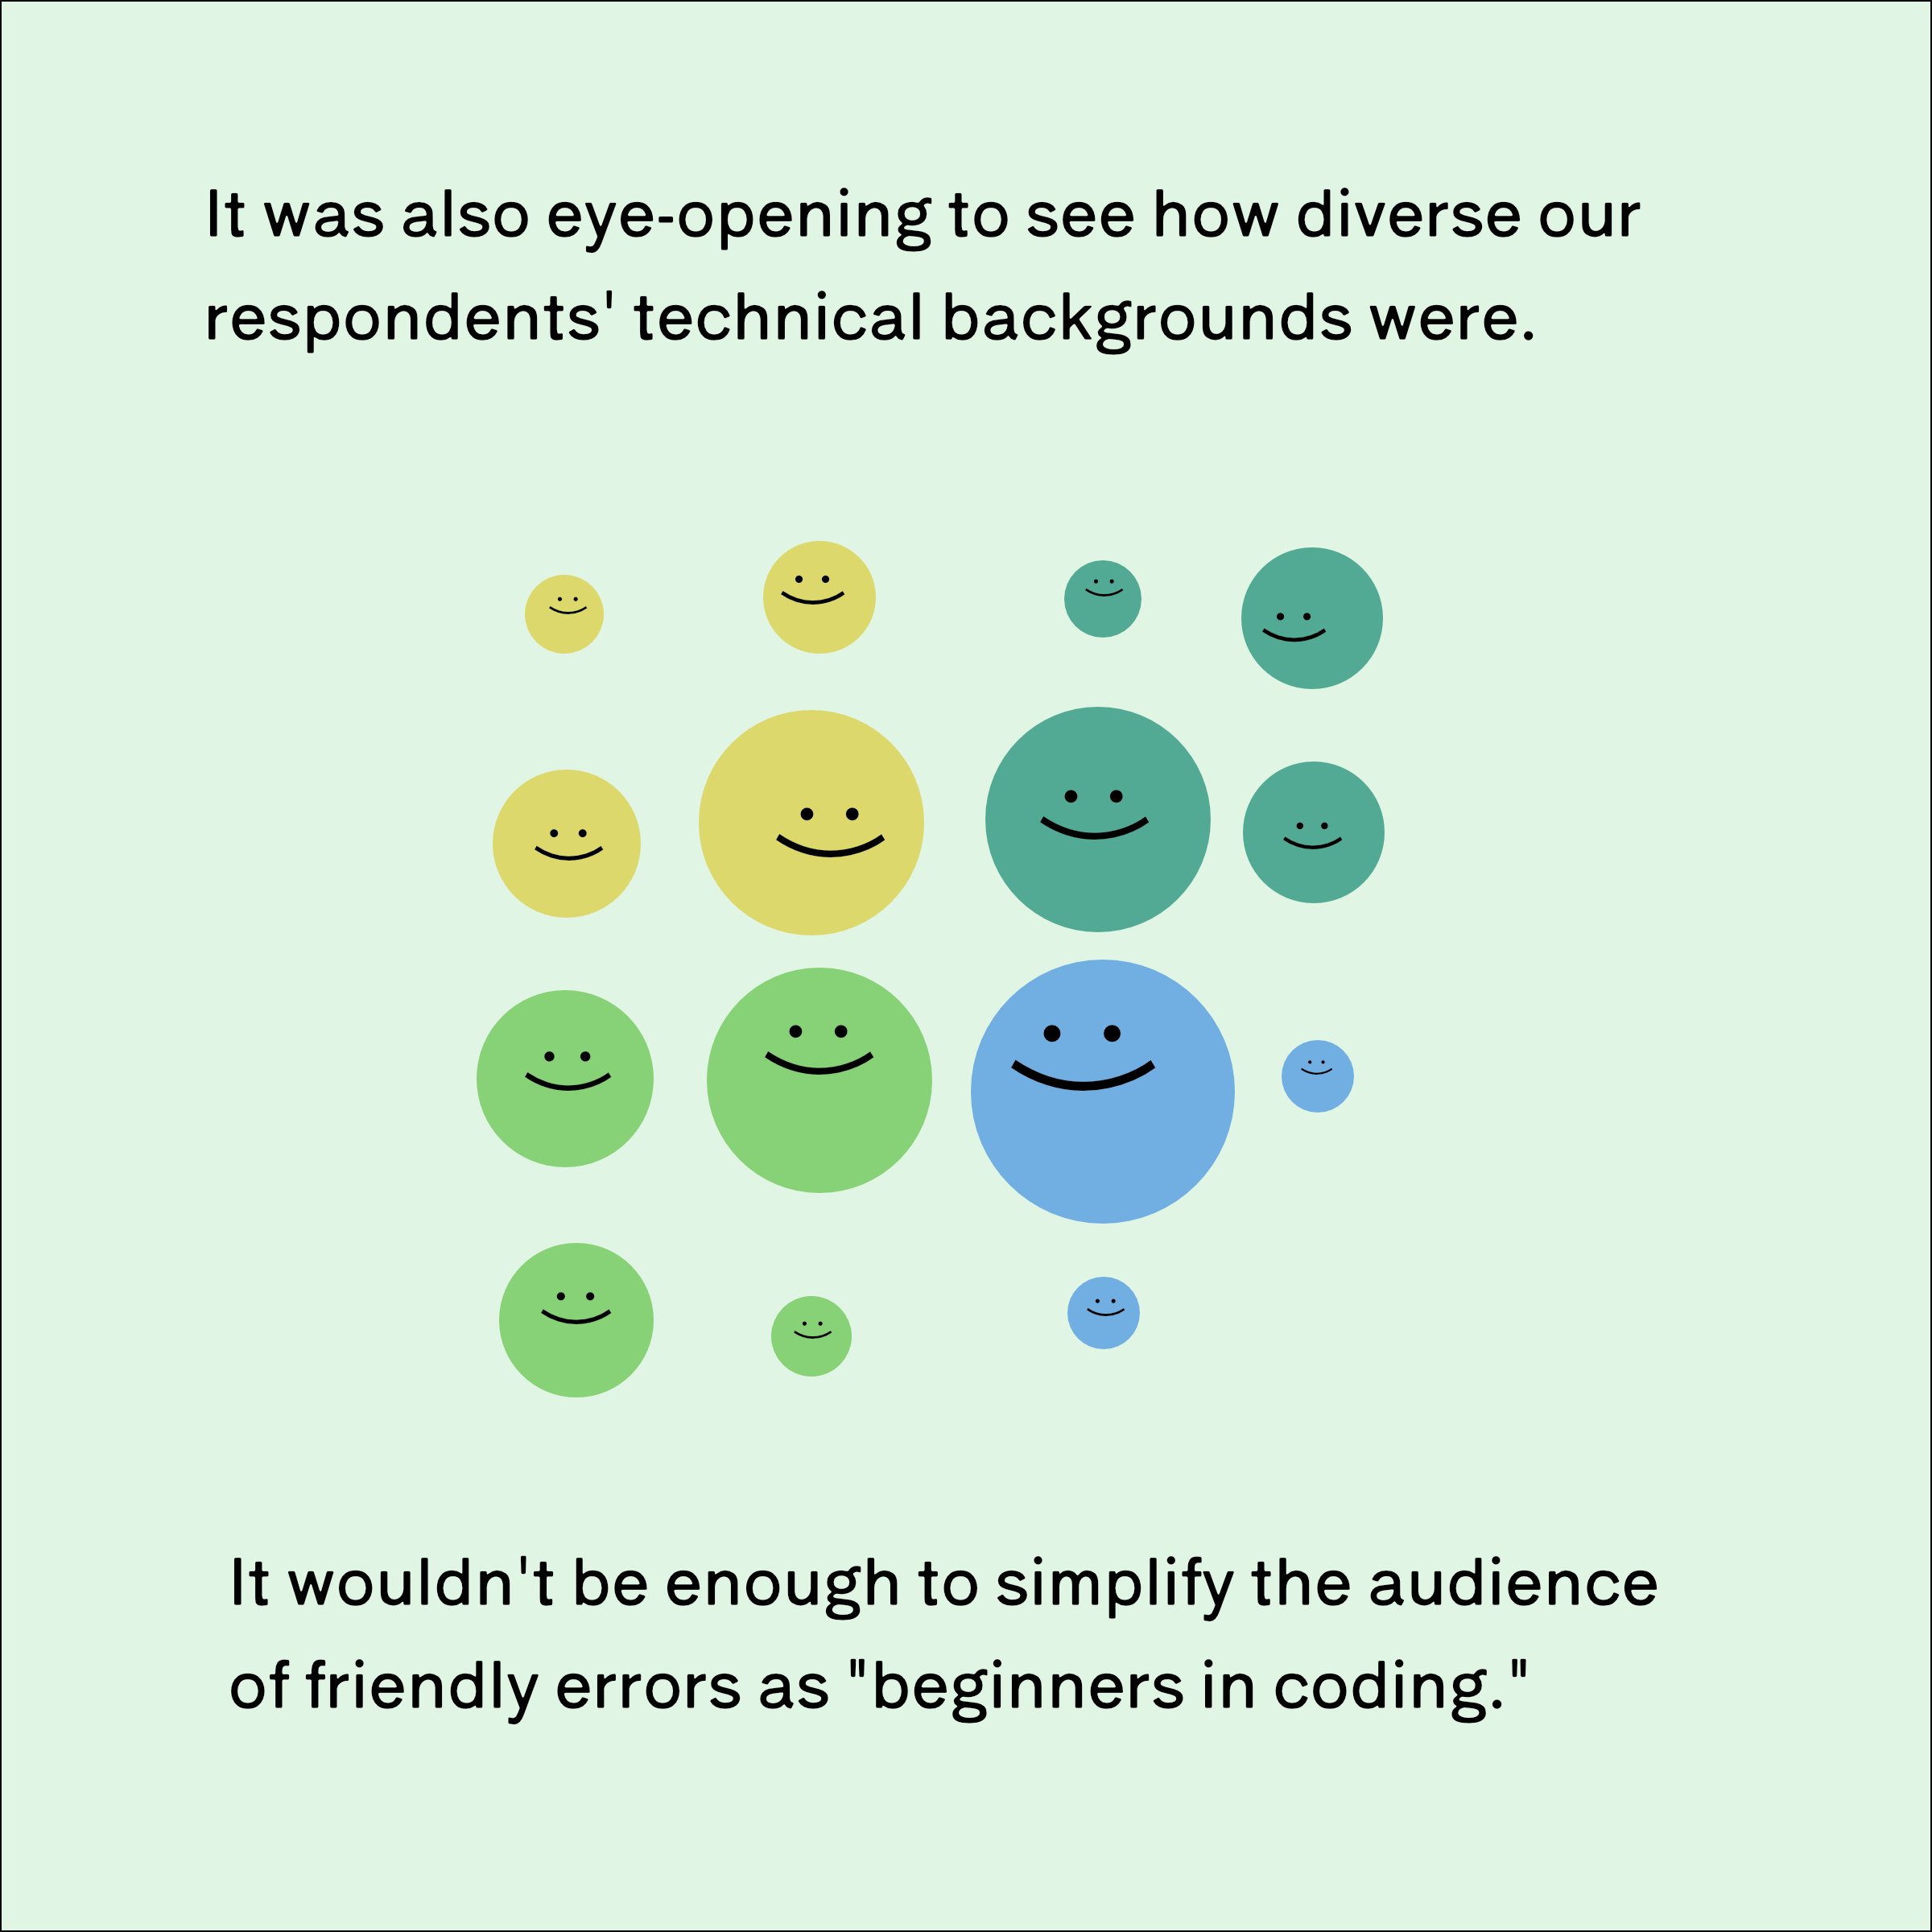 It was also eye-opening to see how diverse our respondents' technical backgrounds were. The nuances of our users' needs will be ignored if we simplify the audience of friendly errors as "beginners in coding."